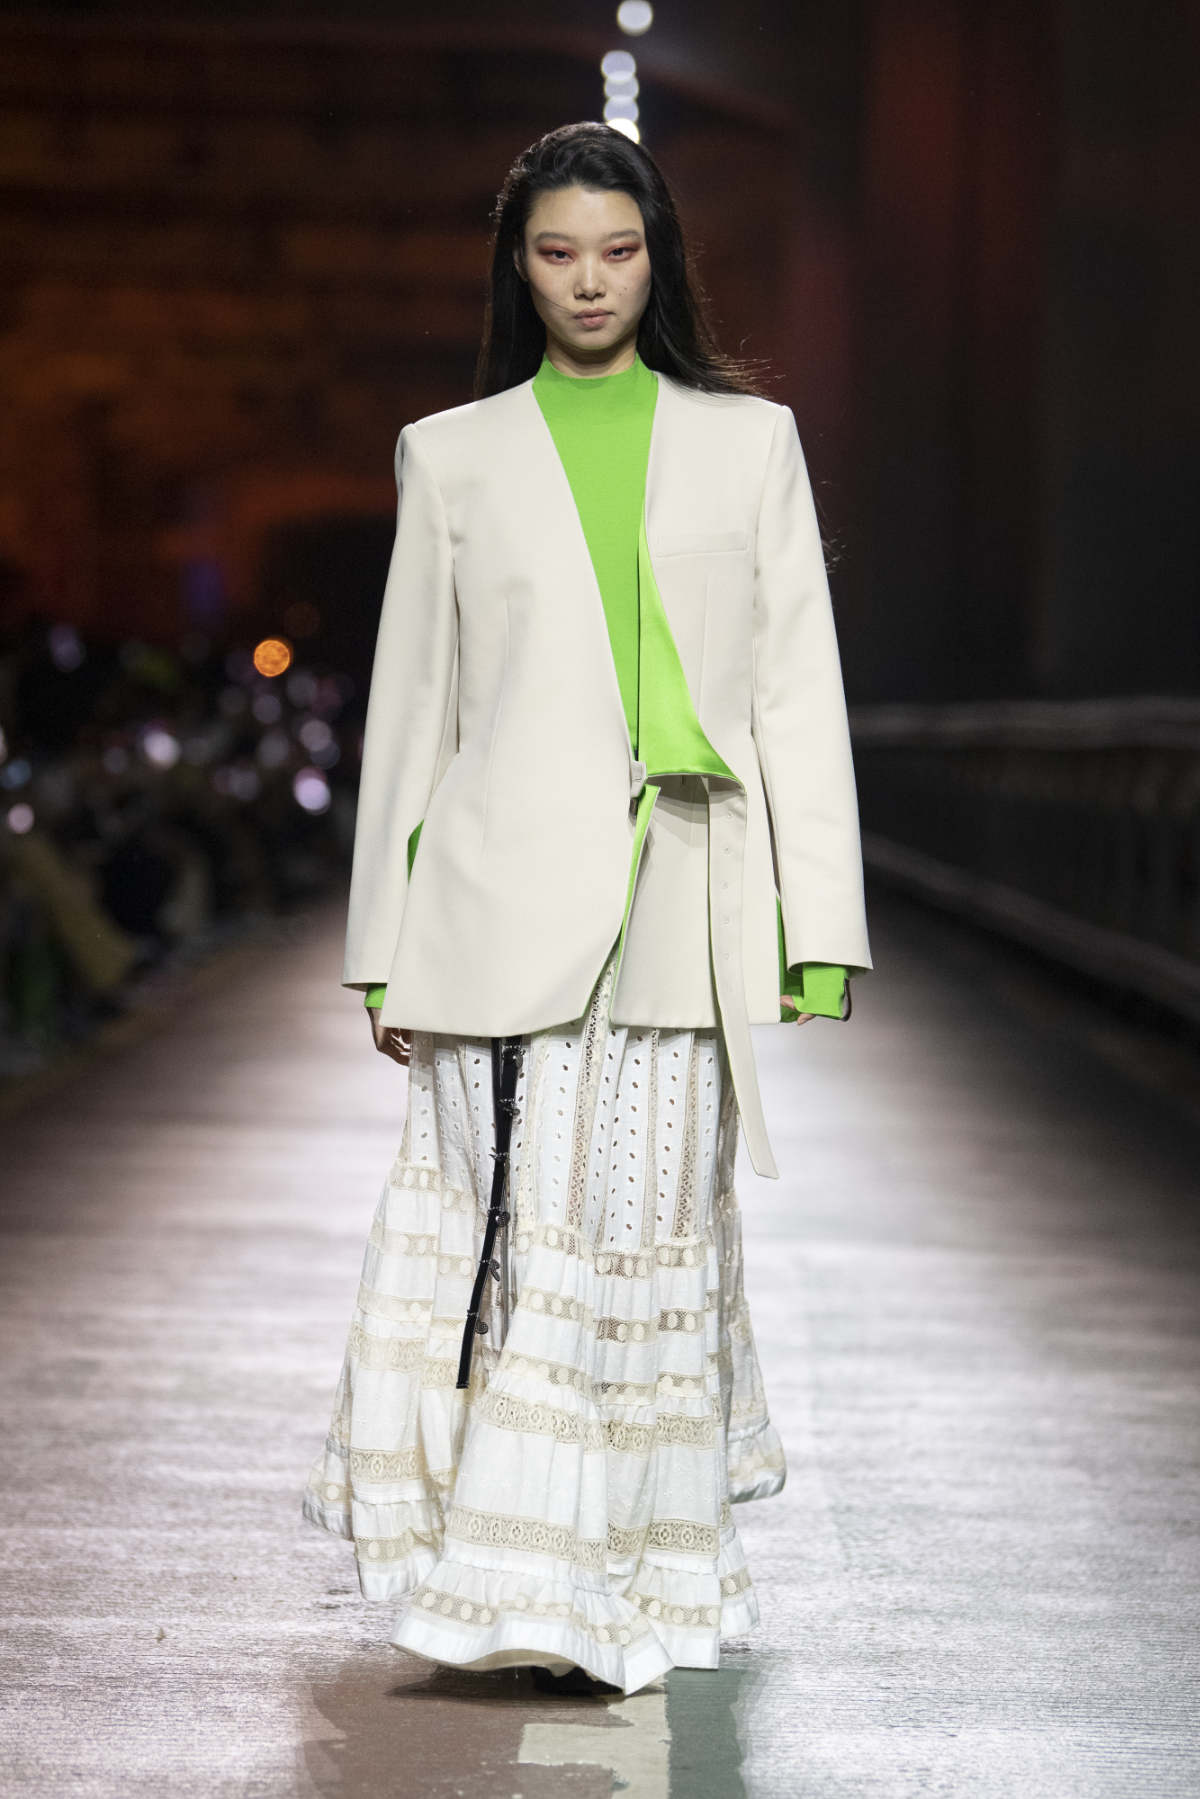 Louis Vuitton Presents Its New Prefall 2023 Women's Collection